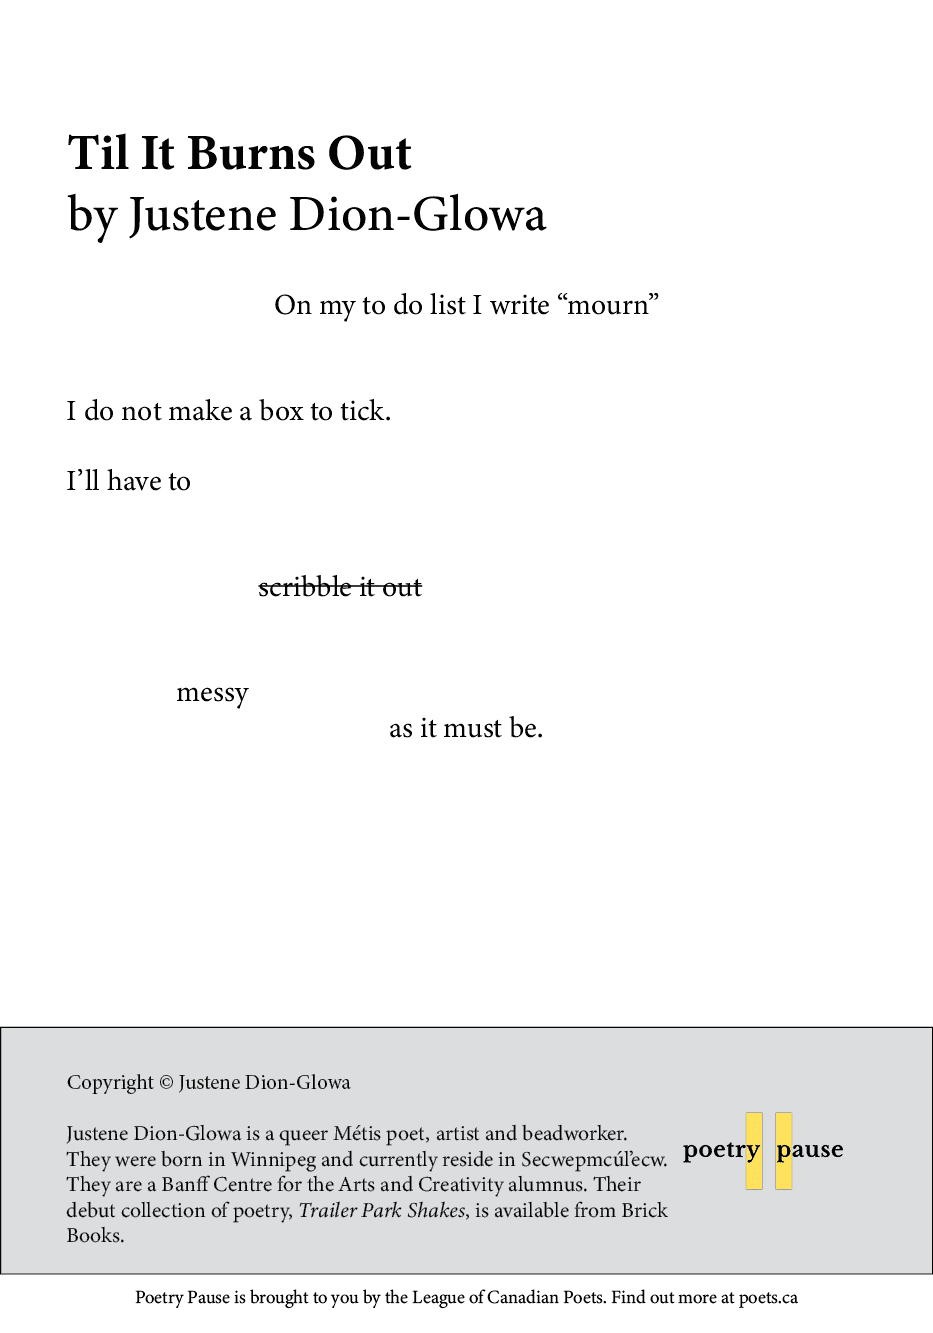 Poem title: Til It Burns Out
Poet name: Justene Dion-Glowa
Poem: On my to do list I write “mourn”


I do not make a box to tick.

I’ll have to


				scribble it out


		  messy
as it must be.
End of poem.
Credits and bio: Copyright © Justene Dion-Glowa
Justene Dion-Glowa is a queer Métis poet, artist and beadworker. They were born in Winnipeg and currently reside in Secwepmcúl’ecw. They are a Banff Centre for the Arts and Creativity alumnus. Their debut collection of poetry, Trailer Park Shakes, is available from Brick Books.